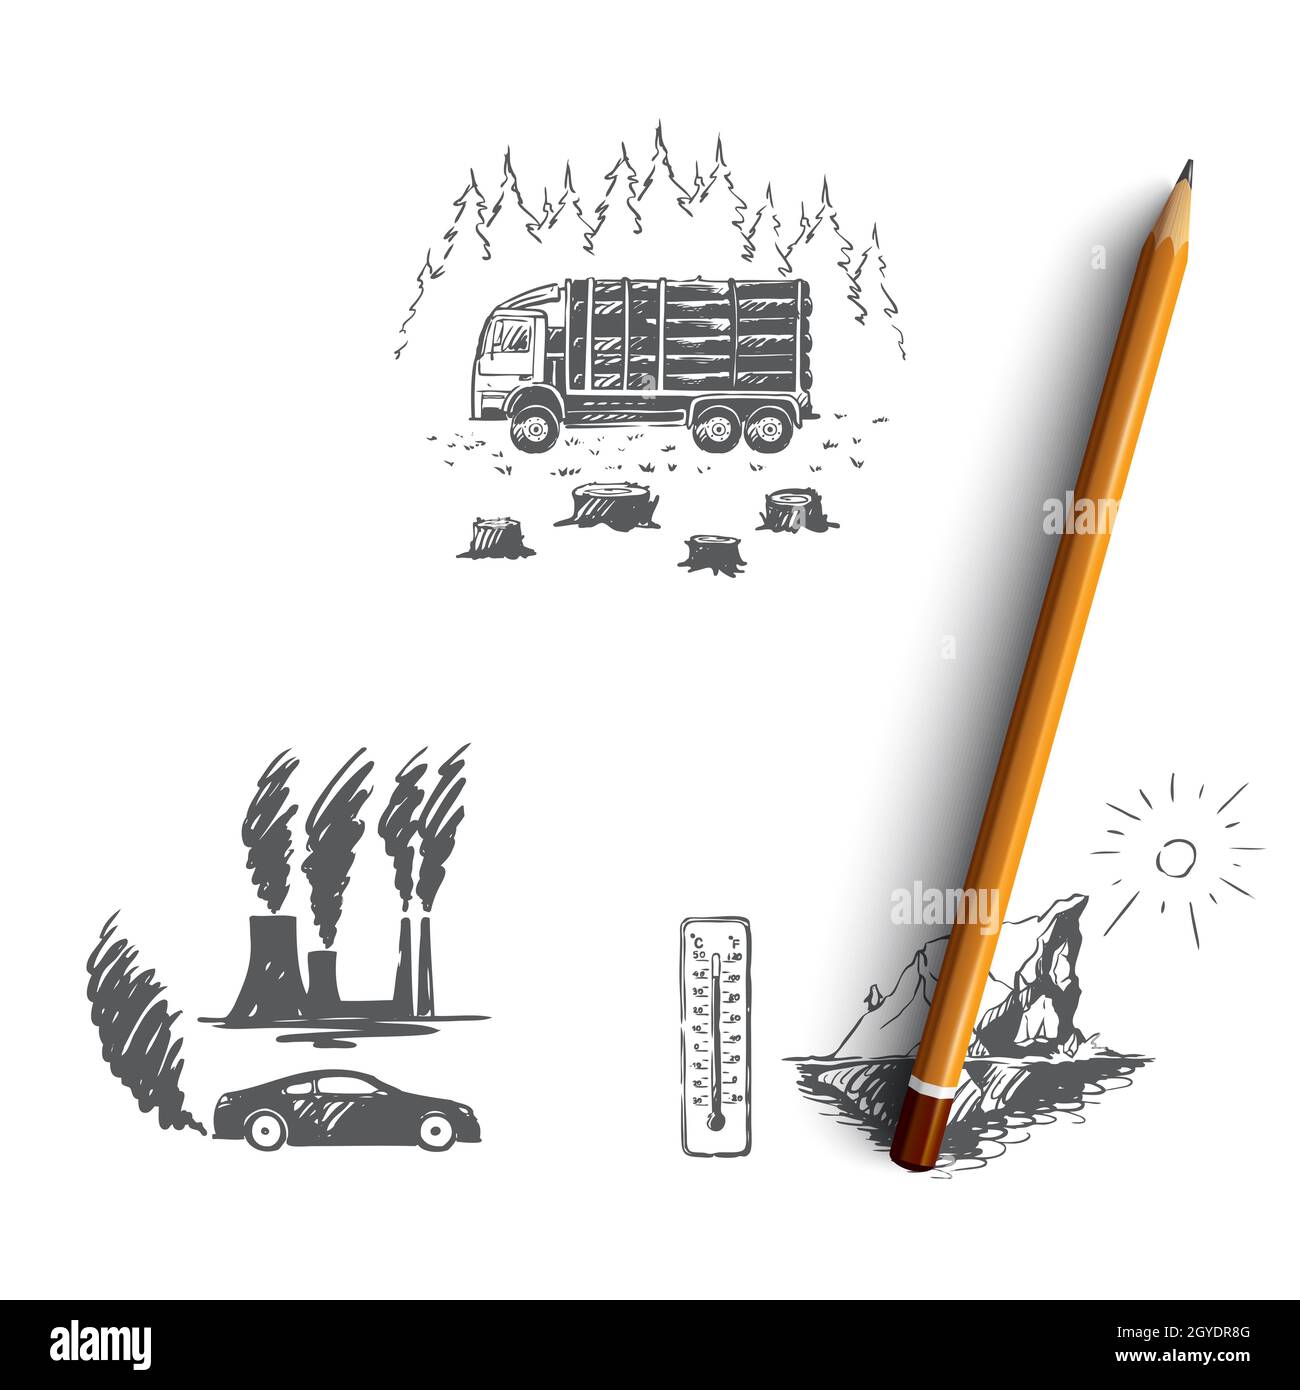 Global warming - factory pollution, iceberg melting, cutting down trees vector concept set. Hand drawn sketch isolated illustration Stock Photo